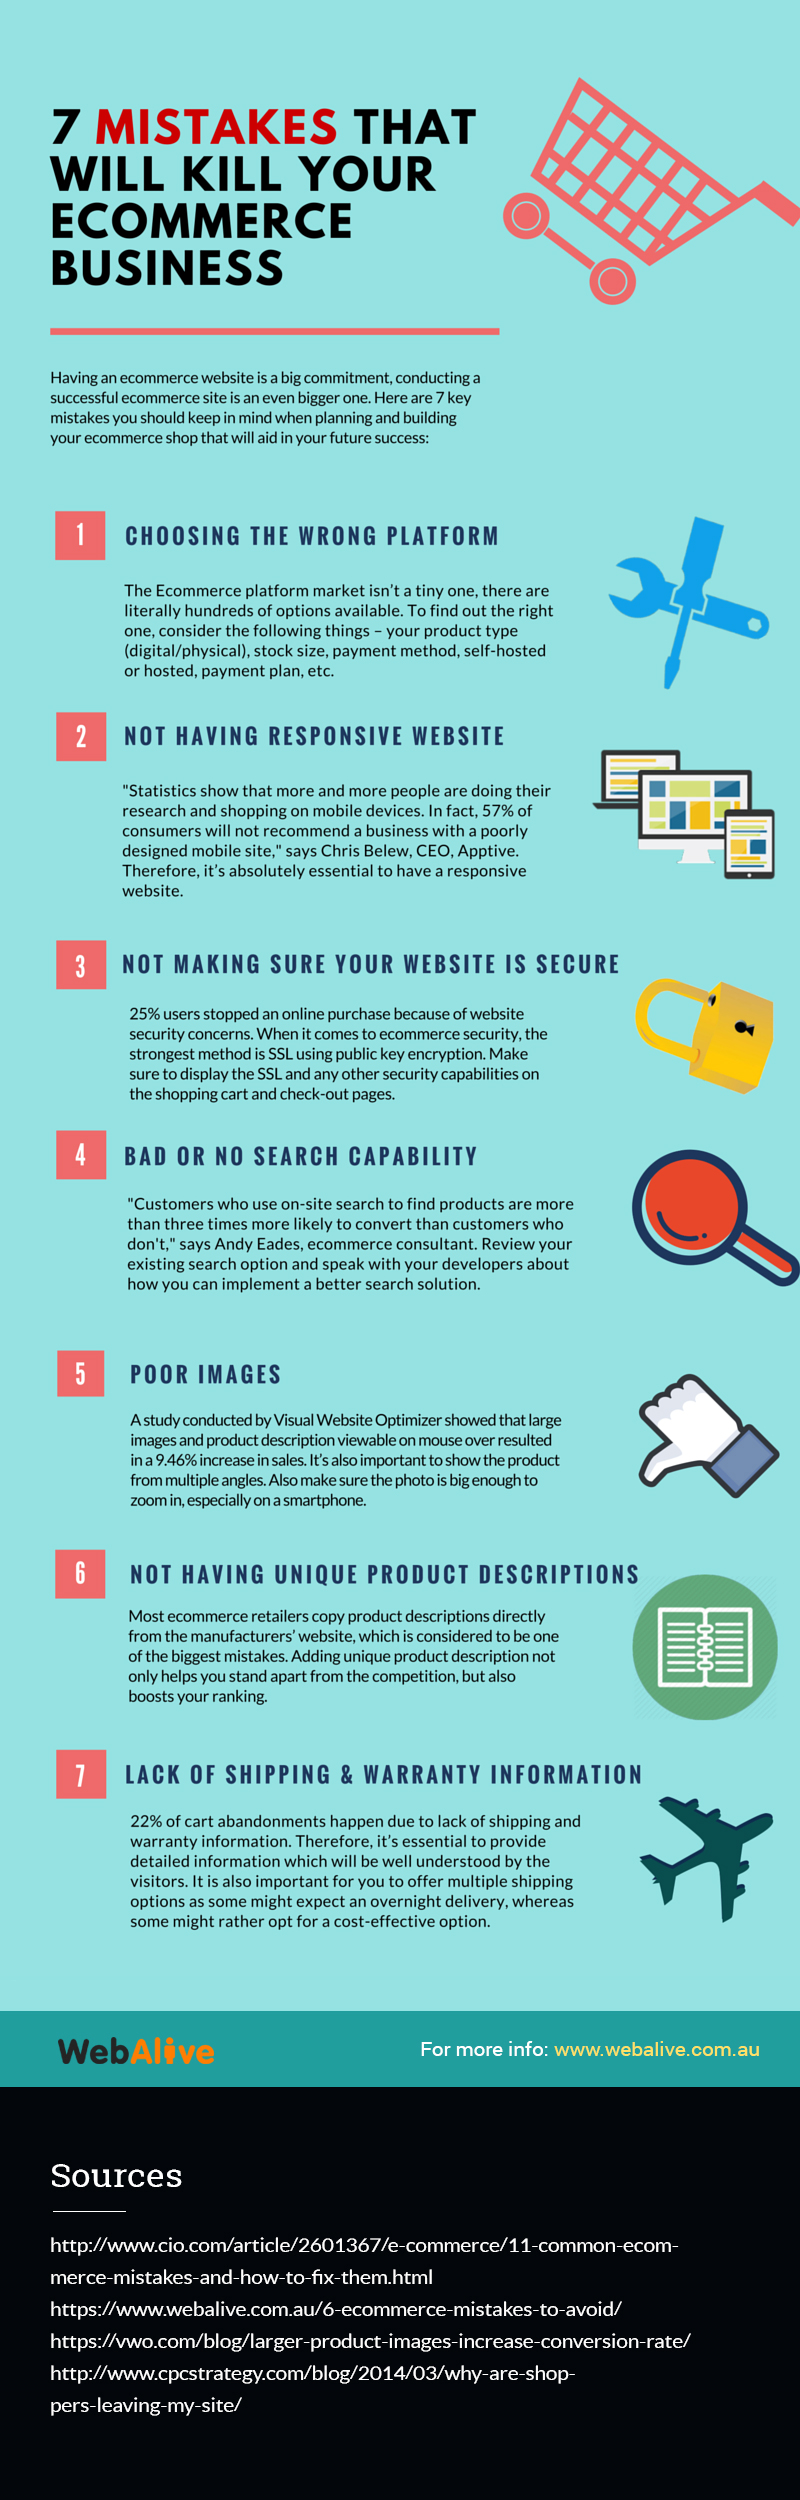 Is Your Ecommerce Website Making These Deadly 7 Mistakes? [ INFOGRAPHIC ] - Image 1